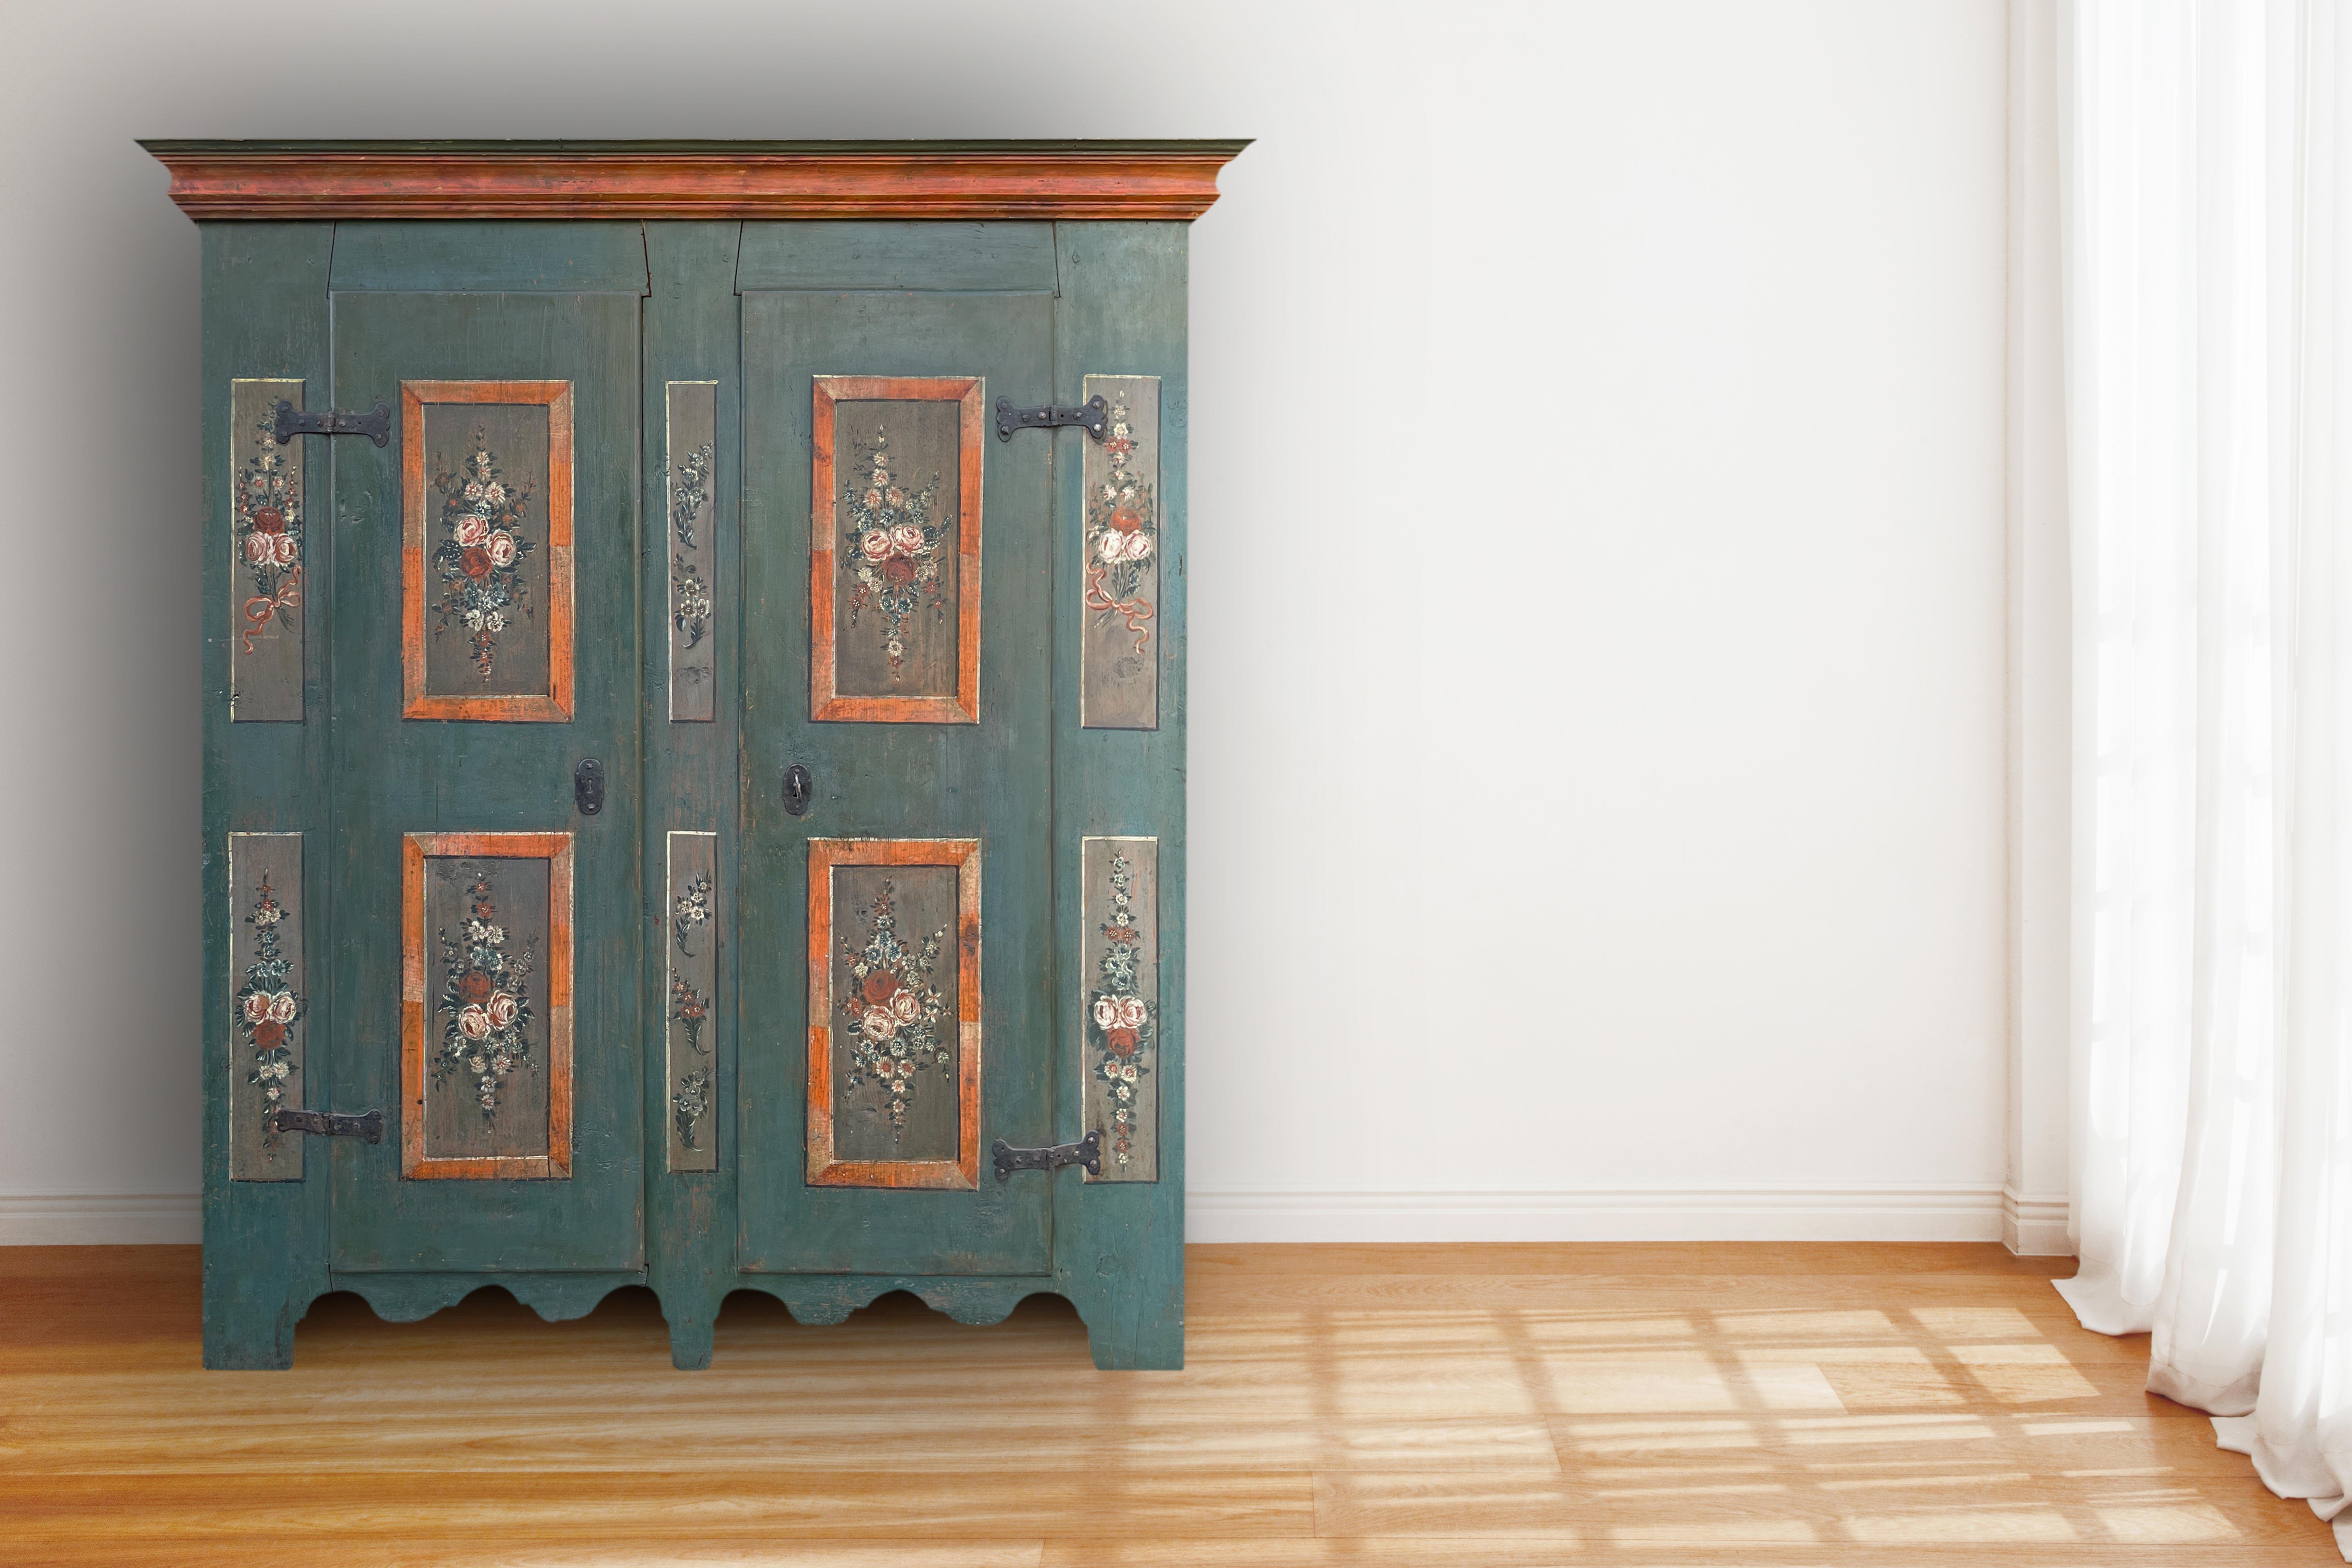 Austrian furniture – Painted Tyrolean wardrobe

H.180 – L.144 (158 at the frames) – P.40 (47 at the frames)

Tyrolean painted wardrobe with two doors, with four main panels depicting bouquets of flowers and six smaller panels with bows and floral